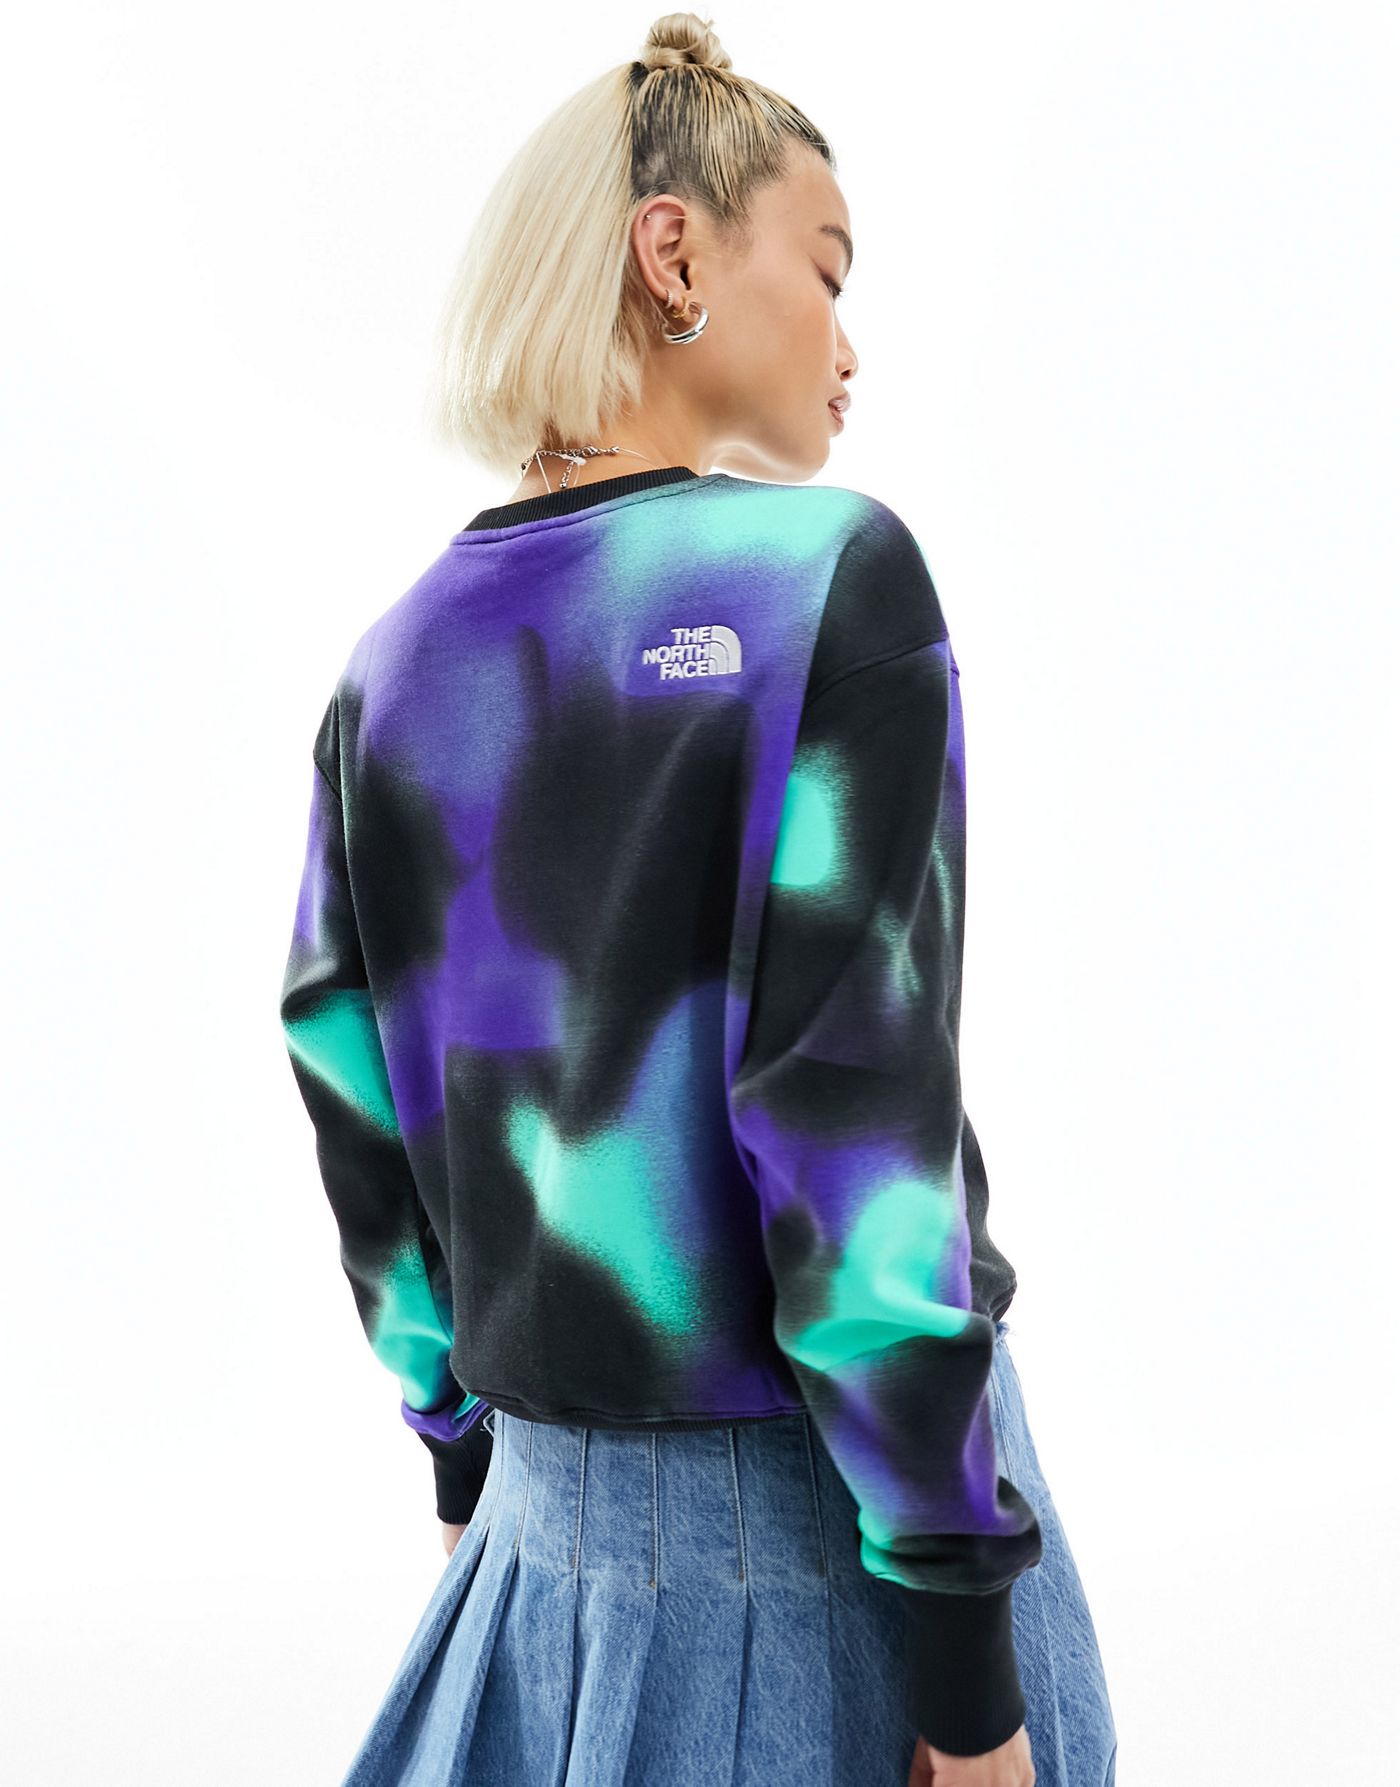 The North Face Essential oversized fleece sweatshirt in blue marble print Exclusive at ASOS